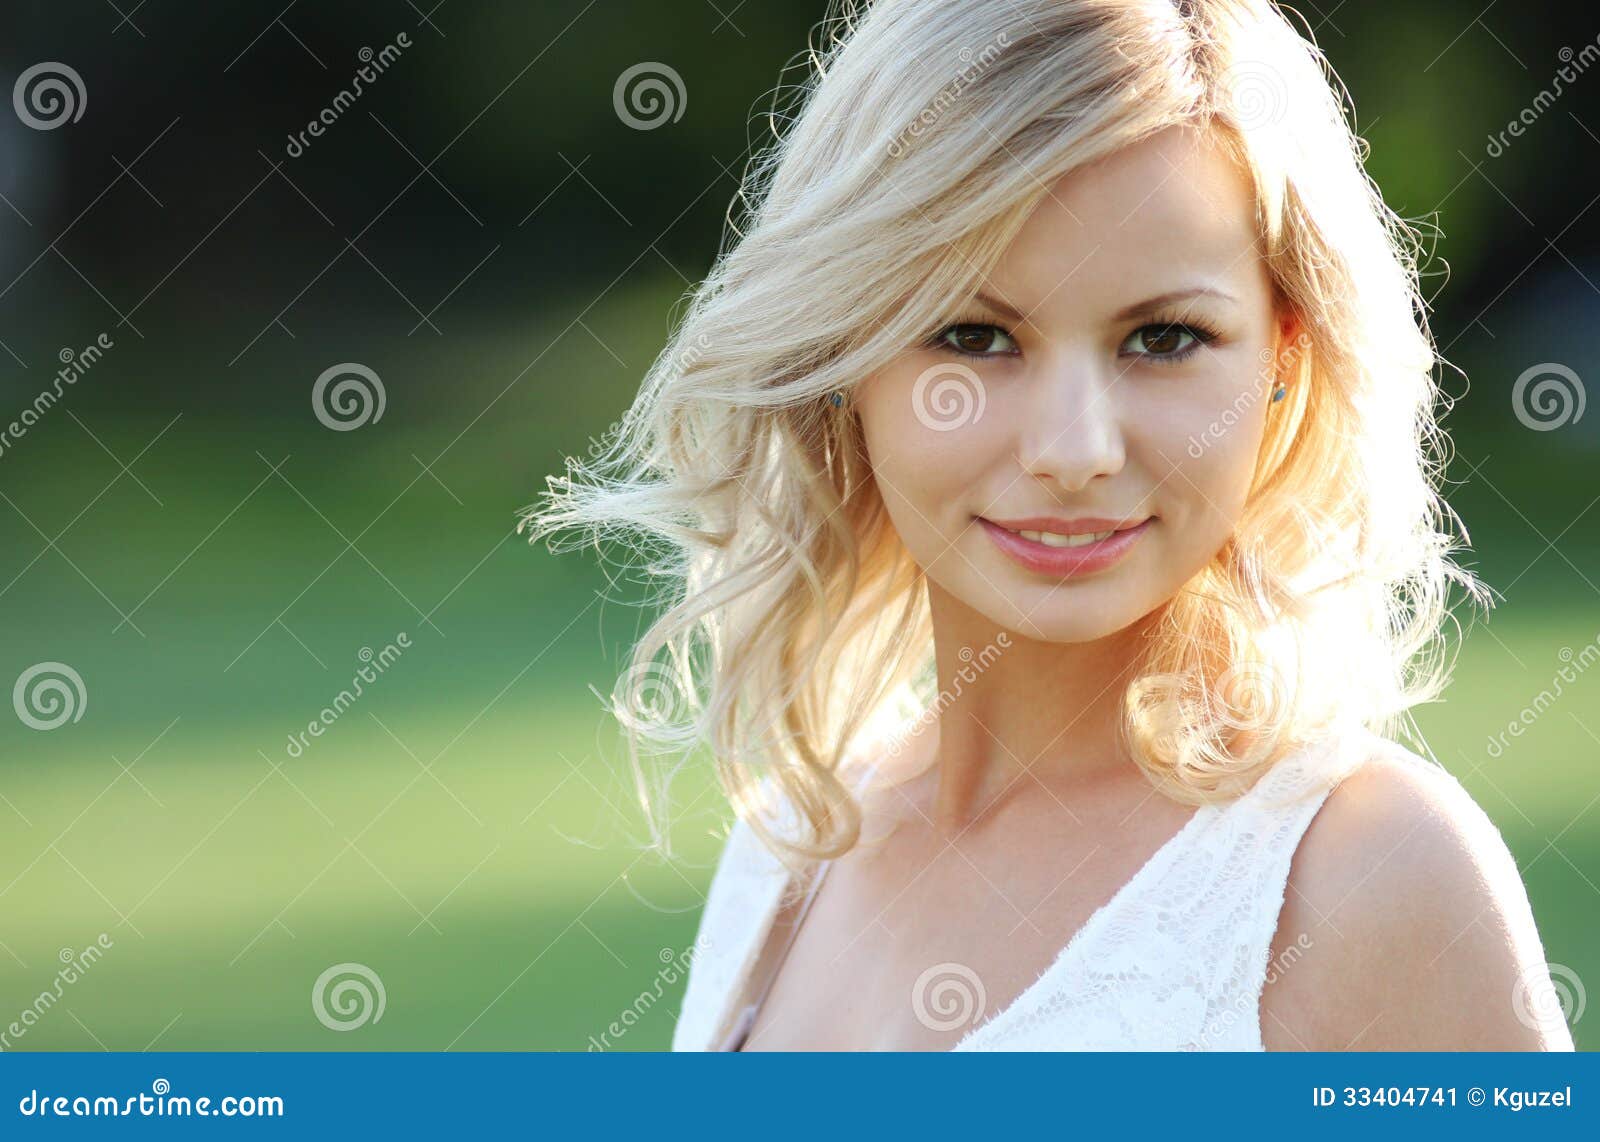 Smiling Blonde Girl. Portrait Of Happy Cheerful Beautiful ...
